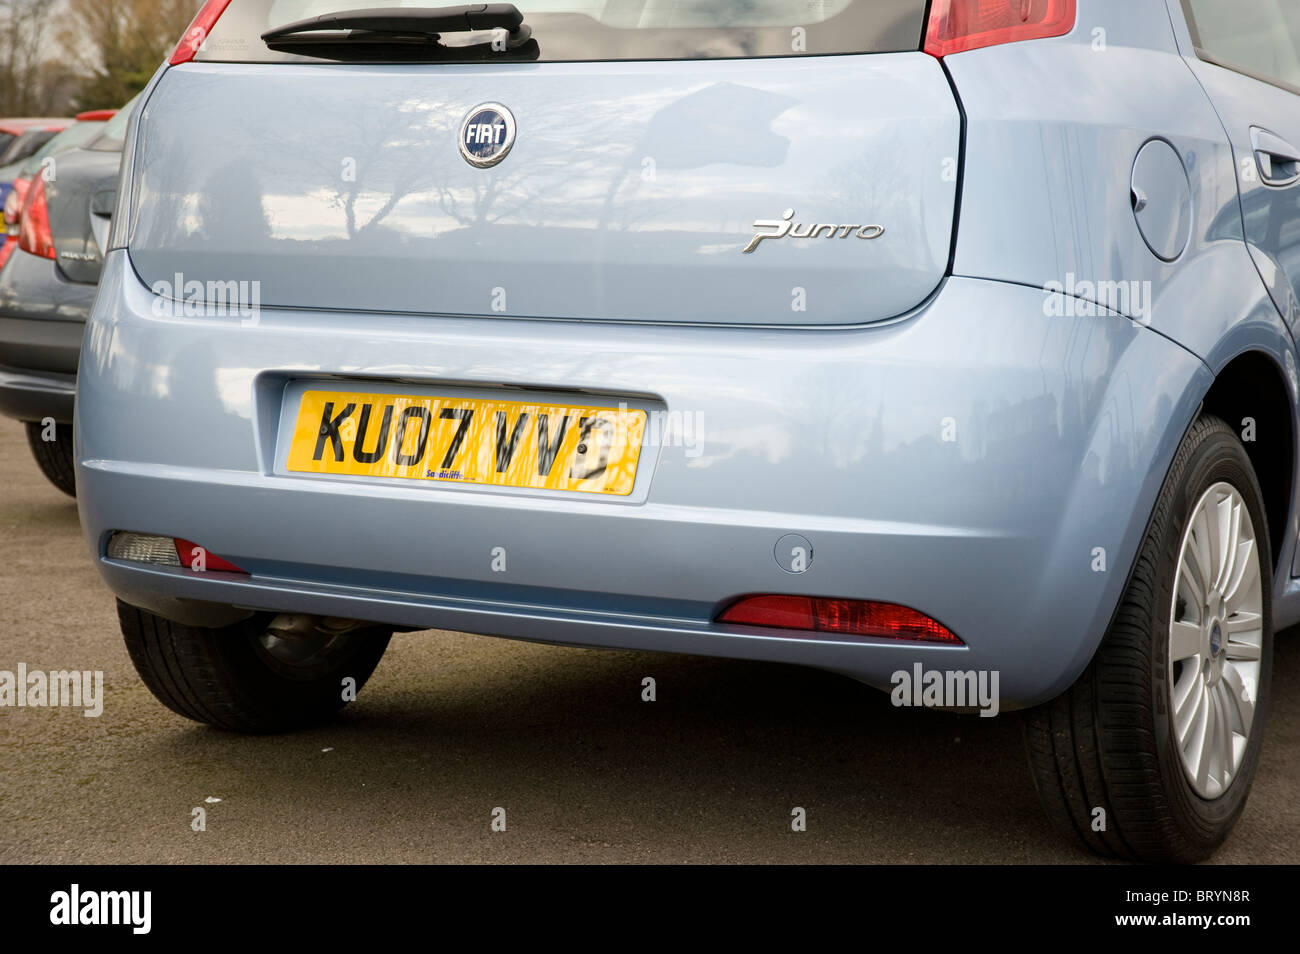 Close up view of the rear of a Fiat Punto car. Stock Photo